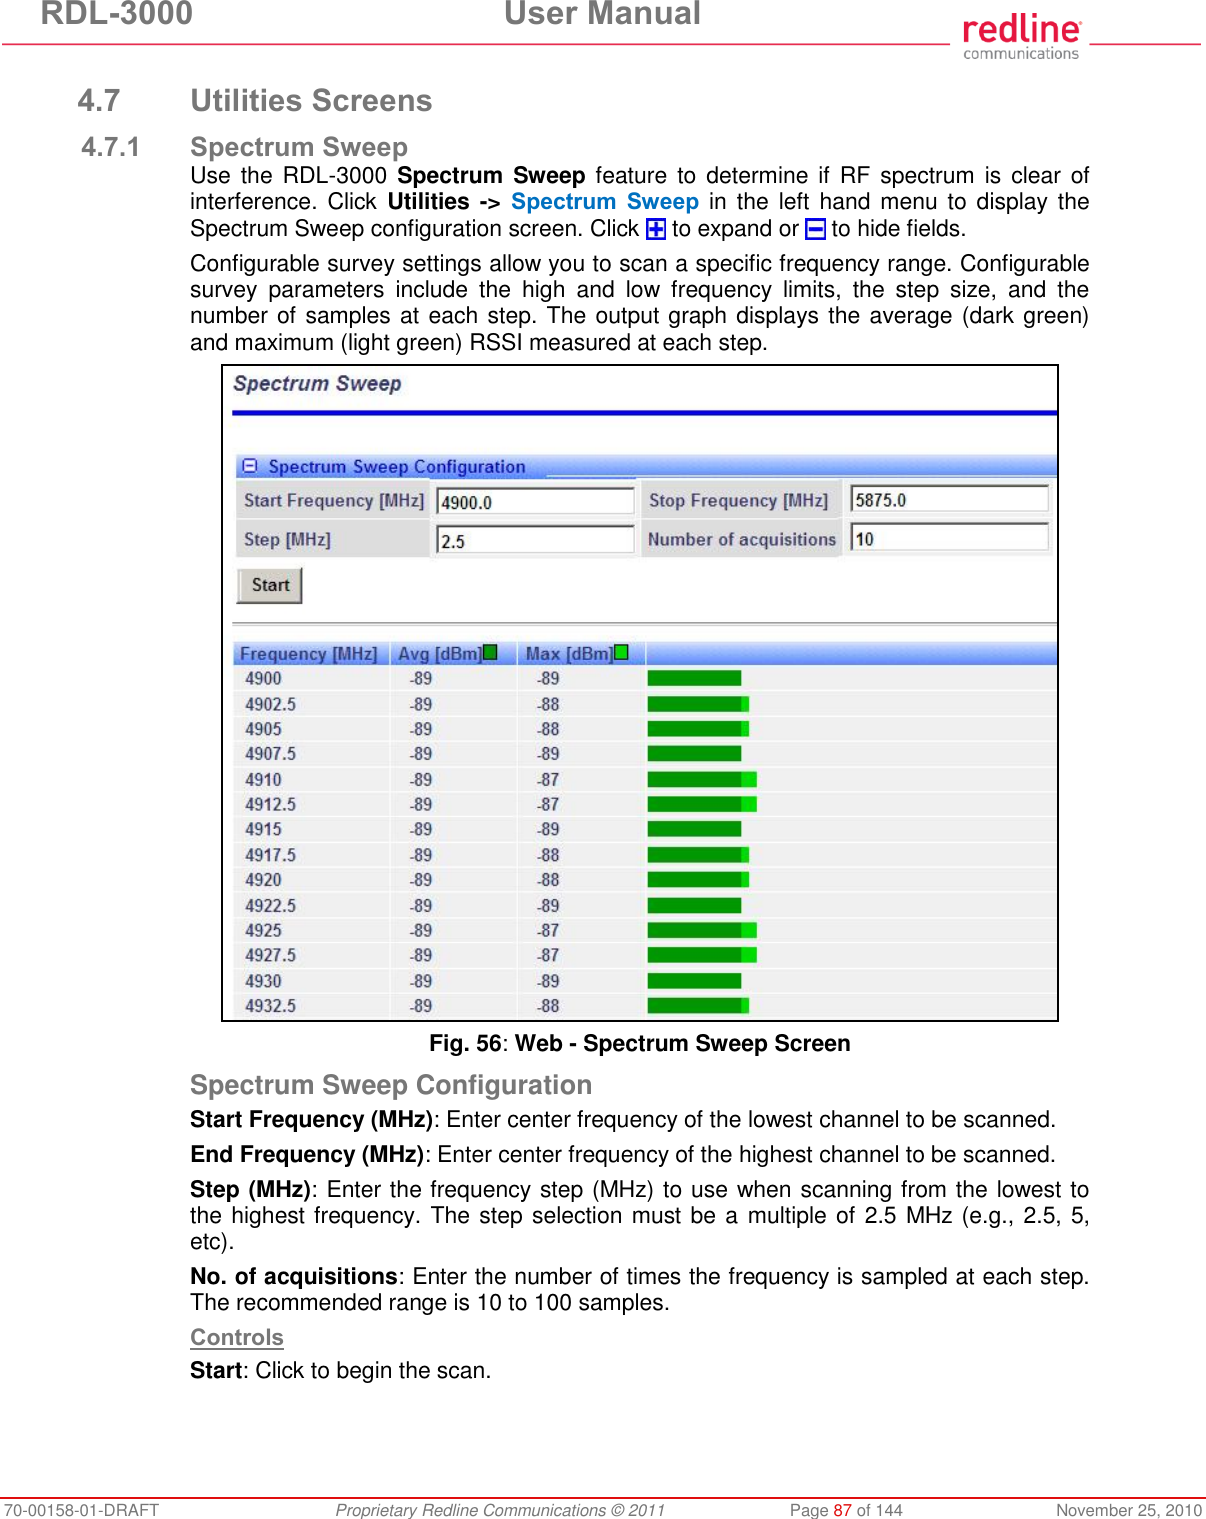 RDL-3000  User Manual 70-00158-01-DRAFT  Proprietary Redline Communications © 2011  Page 87 of 144  November 25, 2010  4.7 Utilities Screens 4.7.1 Spectrum Sweep Use the  RDL-3000  Spectrum Sweep feature  to  determine if  RF  spectrum  is  clear of interference. Click  Utilities -&gt; Spectrum  Sweep in the  left  hand menu to  display the Spectrum Sweep configuration screen. Click   to expand or   to hide fields. Configurable survey settings allow you to scan a specific frequency range. Configurable survey  parameters  include  the  high  and  low  frequency  limits,  the  step  size,  and  the number of samples at each step. The output graph displays the average (dark green) and maximum (light green) RSSI measured at each step.  Fig. 56: Web - Spectrum Sweep Screen  Spectrum Sweep Configuration Start Frequency (MHz): Enter center frequency of the lowest channel to be scanned. End Frequency (MHz): Enter center frequency of the highest channel to be scanned.  Step (MHz): Enter the frequency step (MHz) to use when scanning from the lowest to the highest frequency. The step selection must be a multiple of 2.5 MHz (e.g., 2.5, 5, etc). No. of acquisitions: Enter the number of times the frequency is sampled at each step. The recommended range is 10 to 100 samples.  Controls Start: Click to begin the scan. 